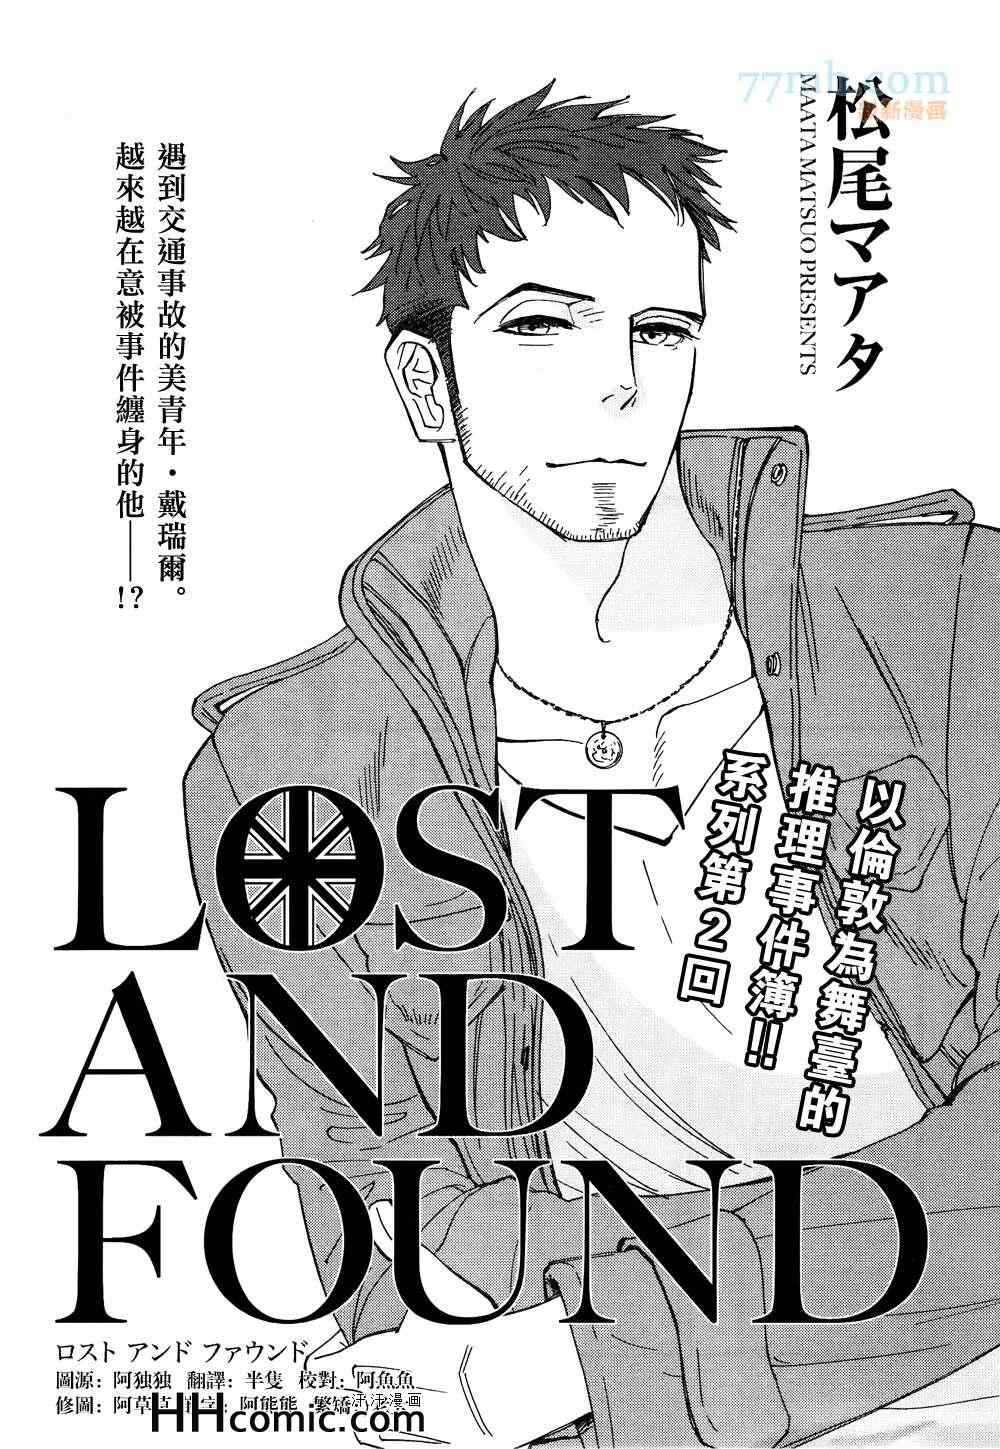 《Lost and Found》漫画 Found 002集